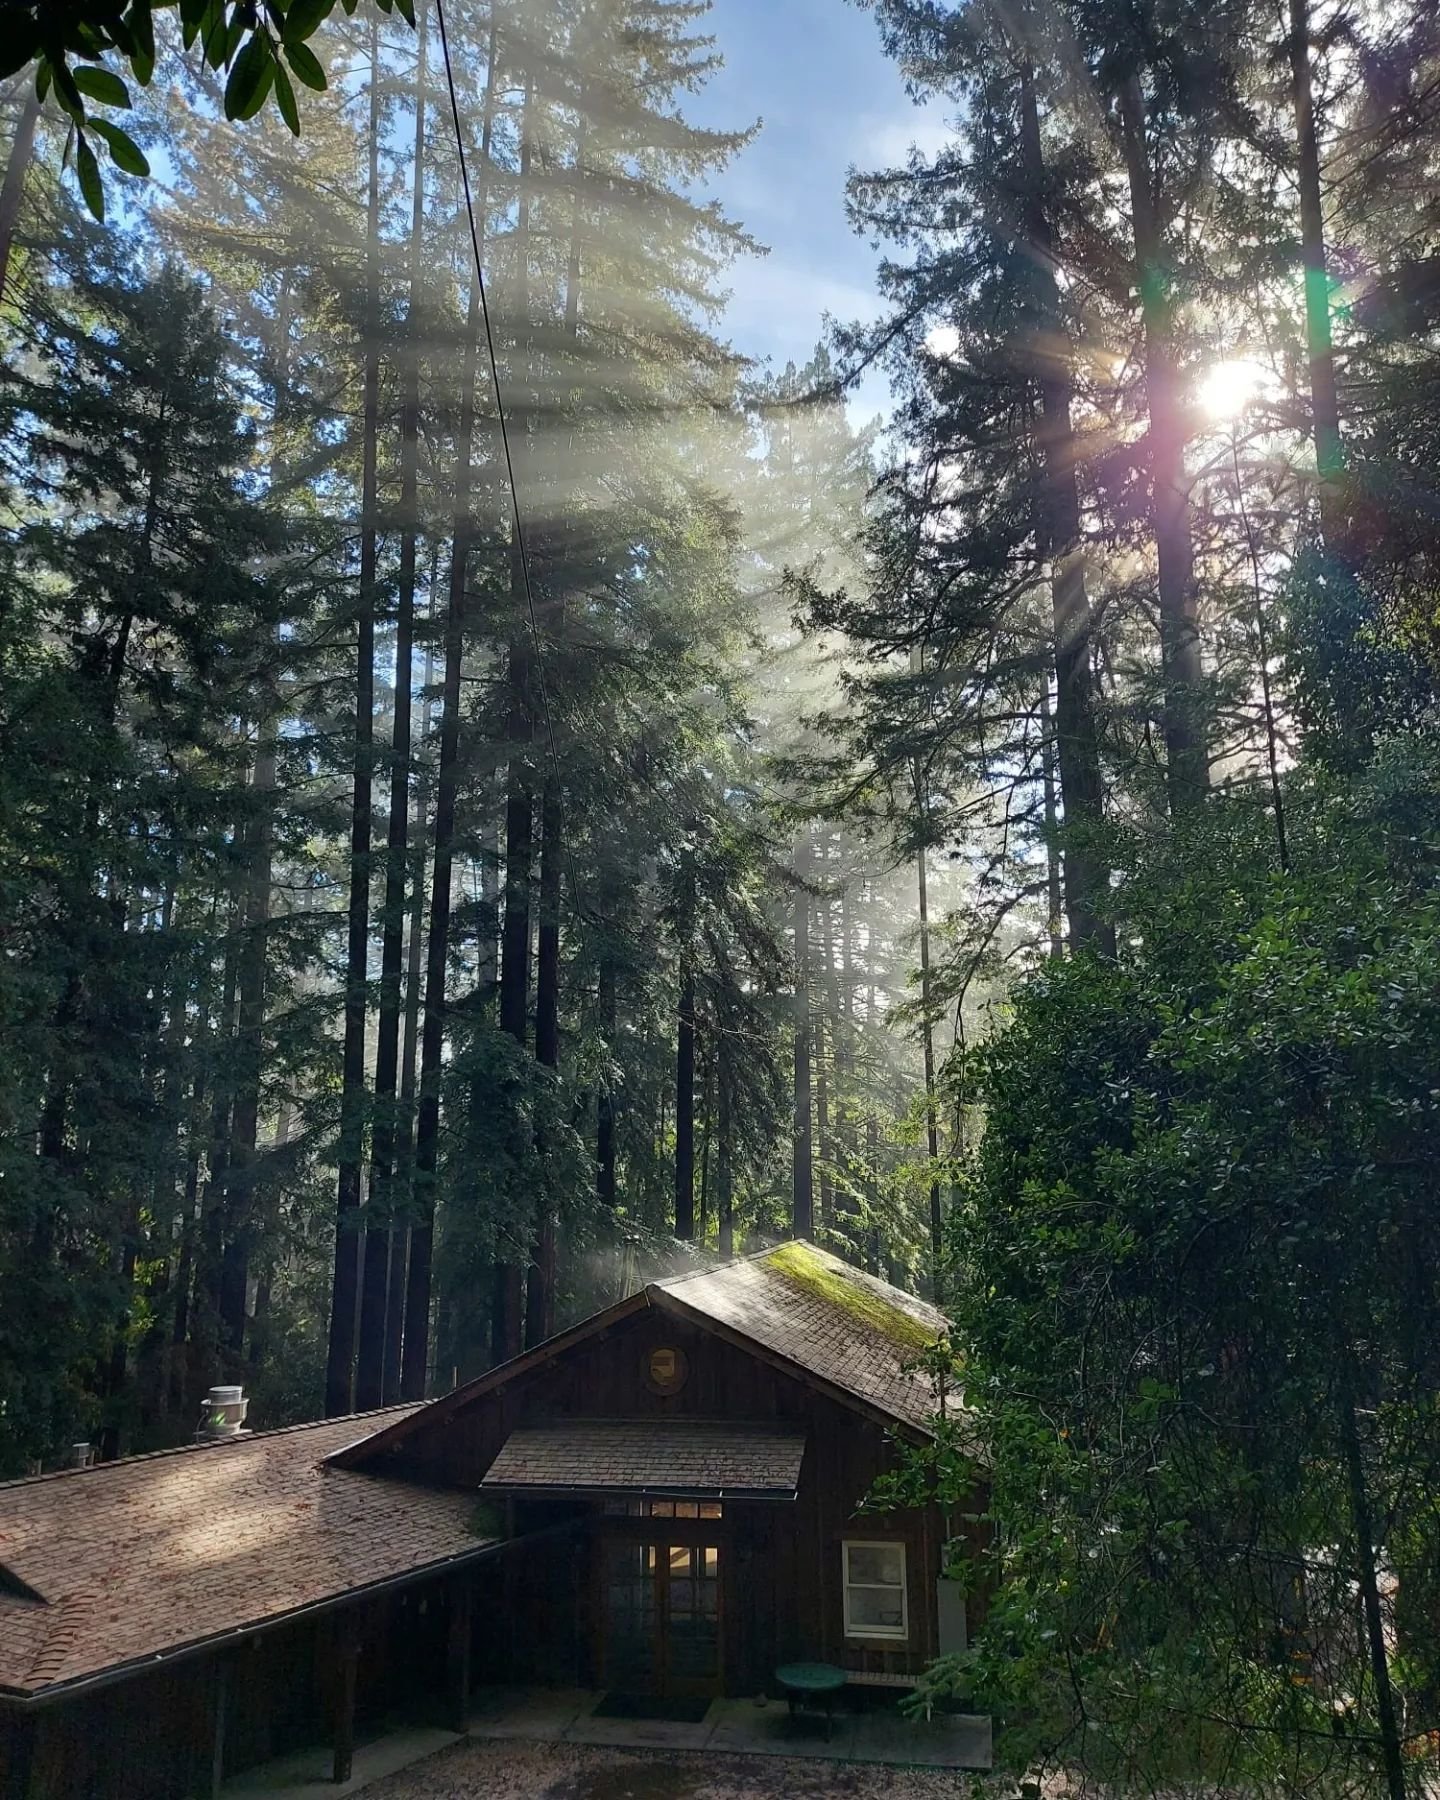 In less than 2 weeks, we're excited to host our first ever retreat where we'll commune with the beautiful redwood forest on Awaswas Land in the Santa Cruz Mountains. Grateful to our partners at the Ben Lomond Quaker Center for welcoming us! 

Please 